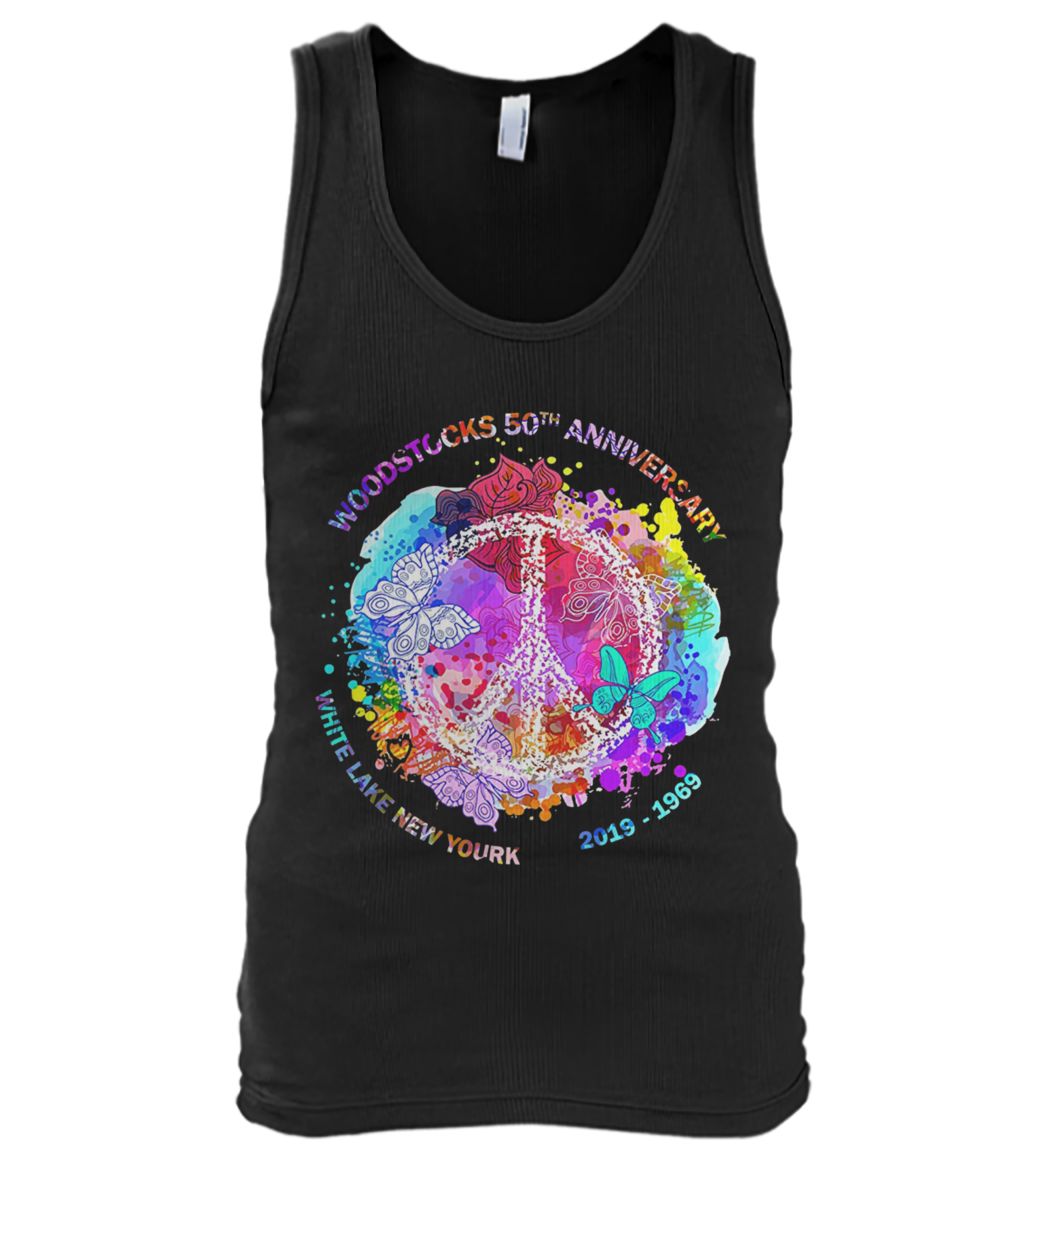 Hippie woodstock 50th anniversary 1969-2019 peace and love men's tank top